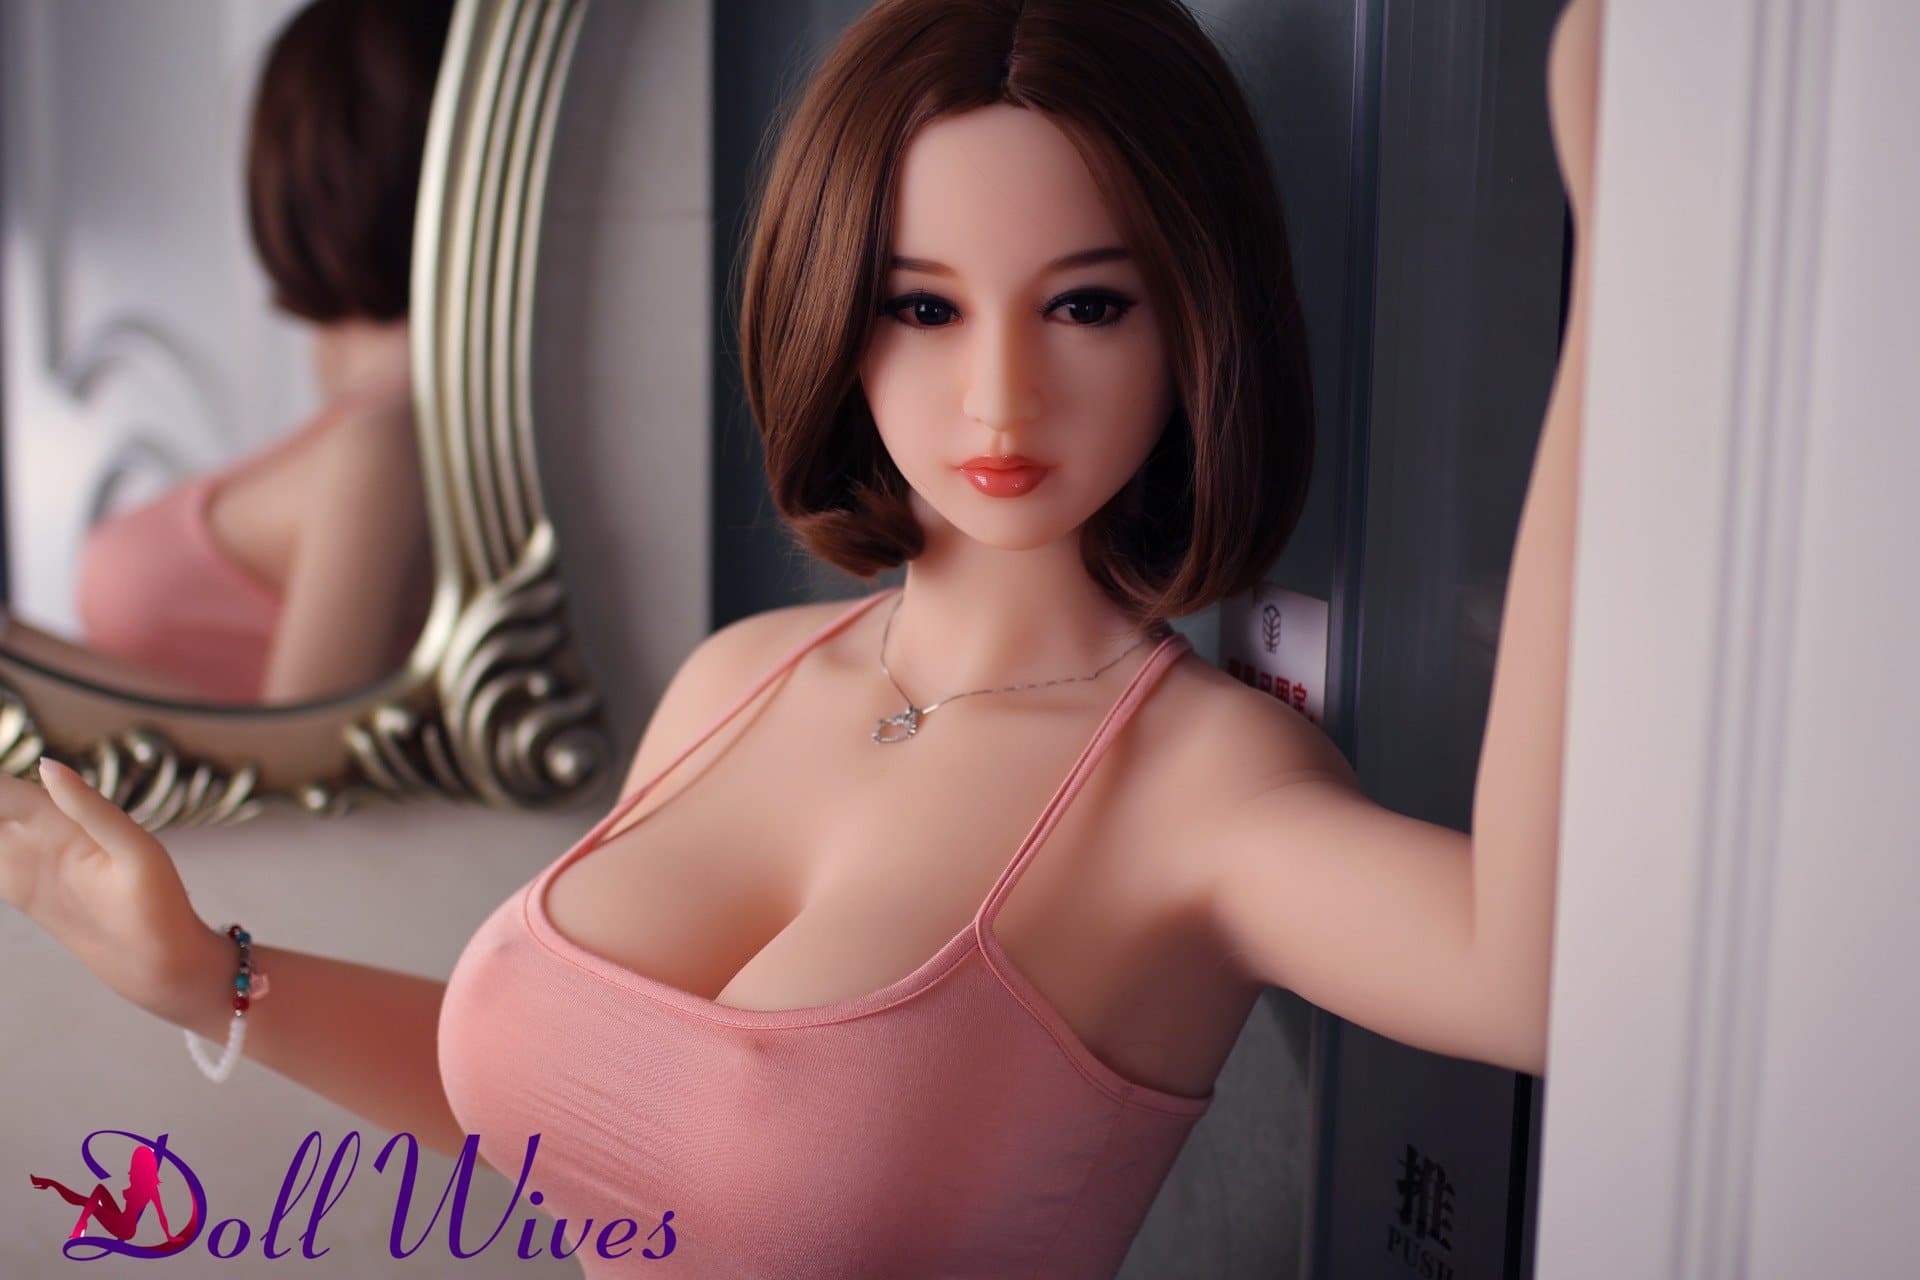 Why You Can’t Silicone Adult Doll Without Twitter